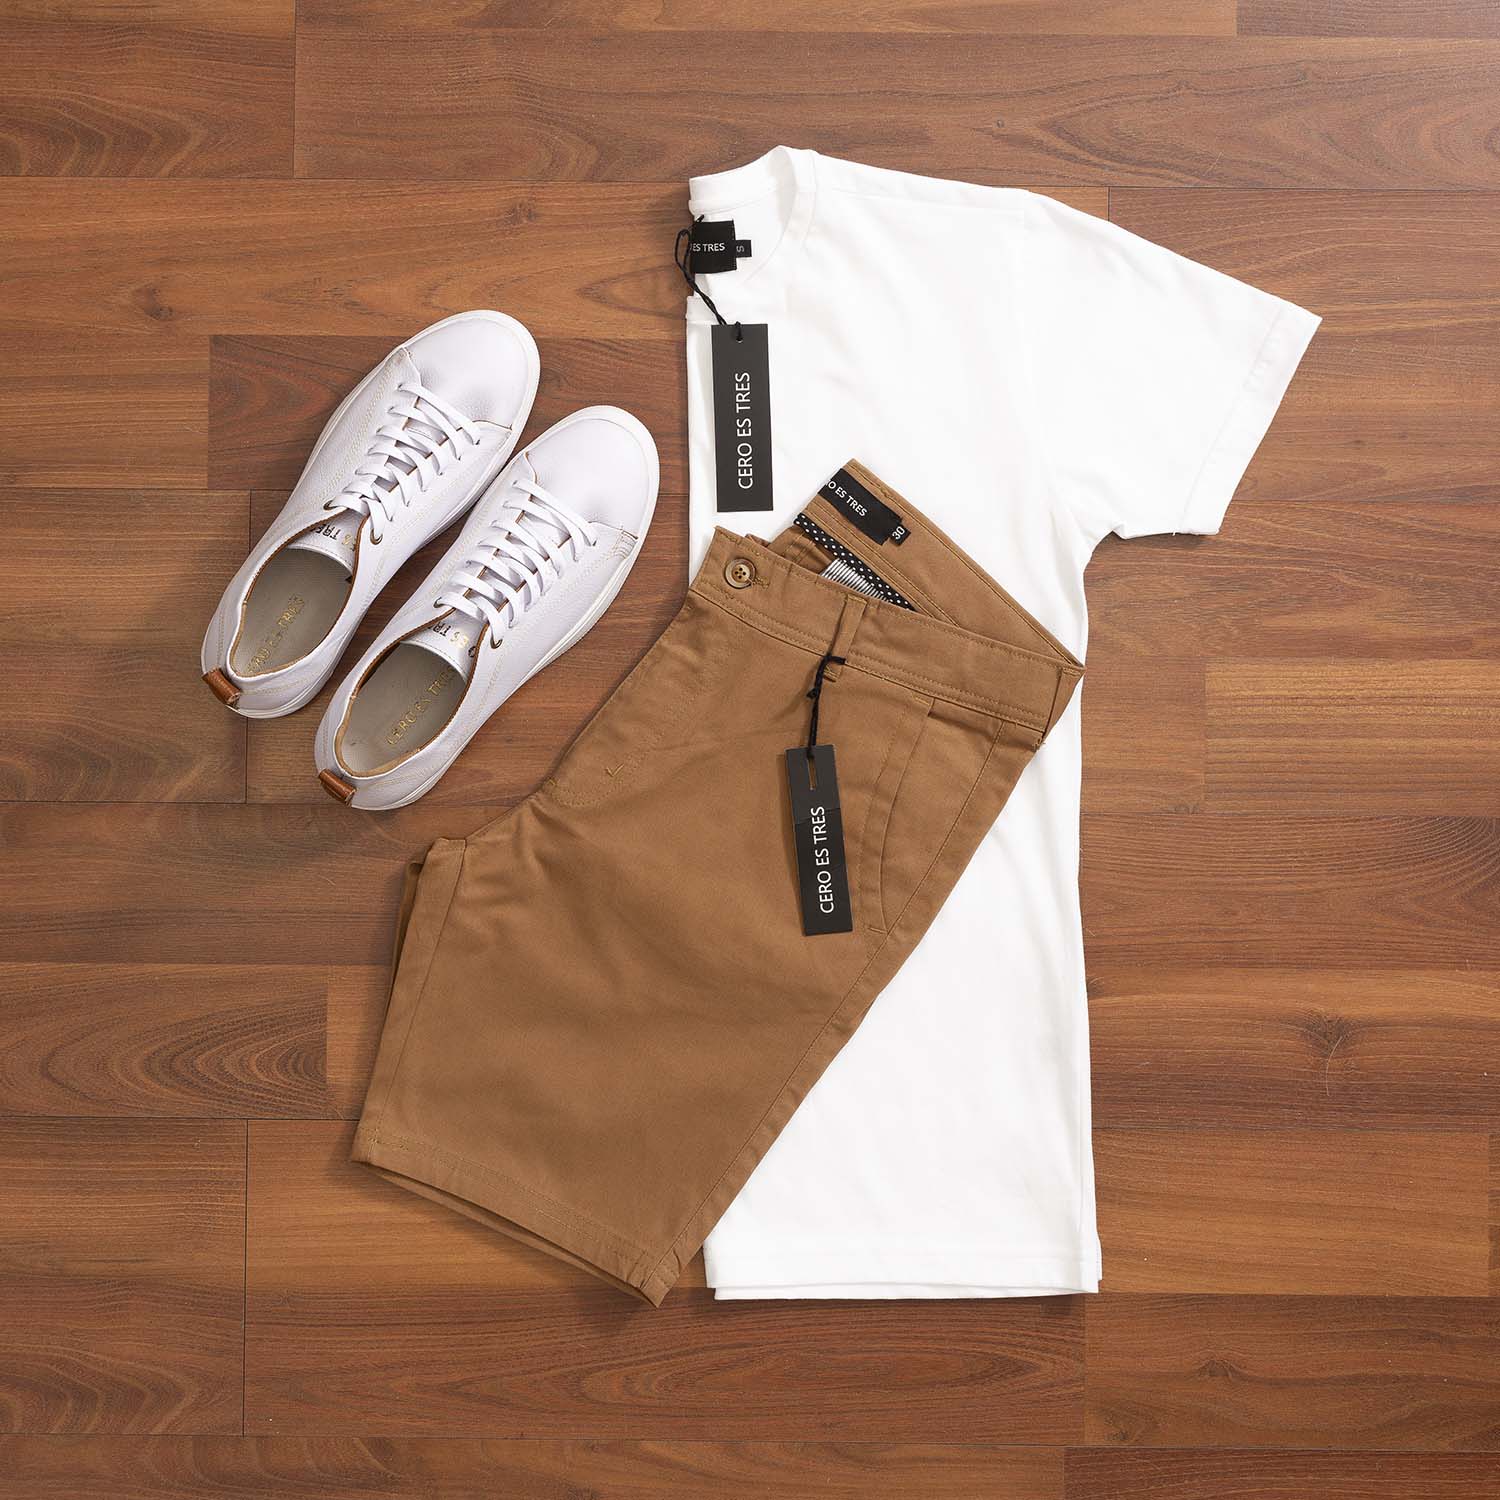 OUTFIT CERO 470